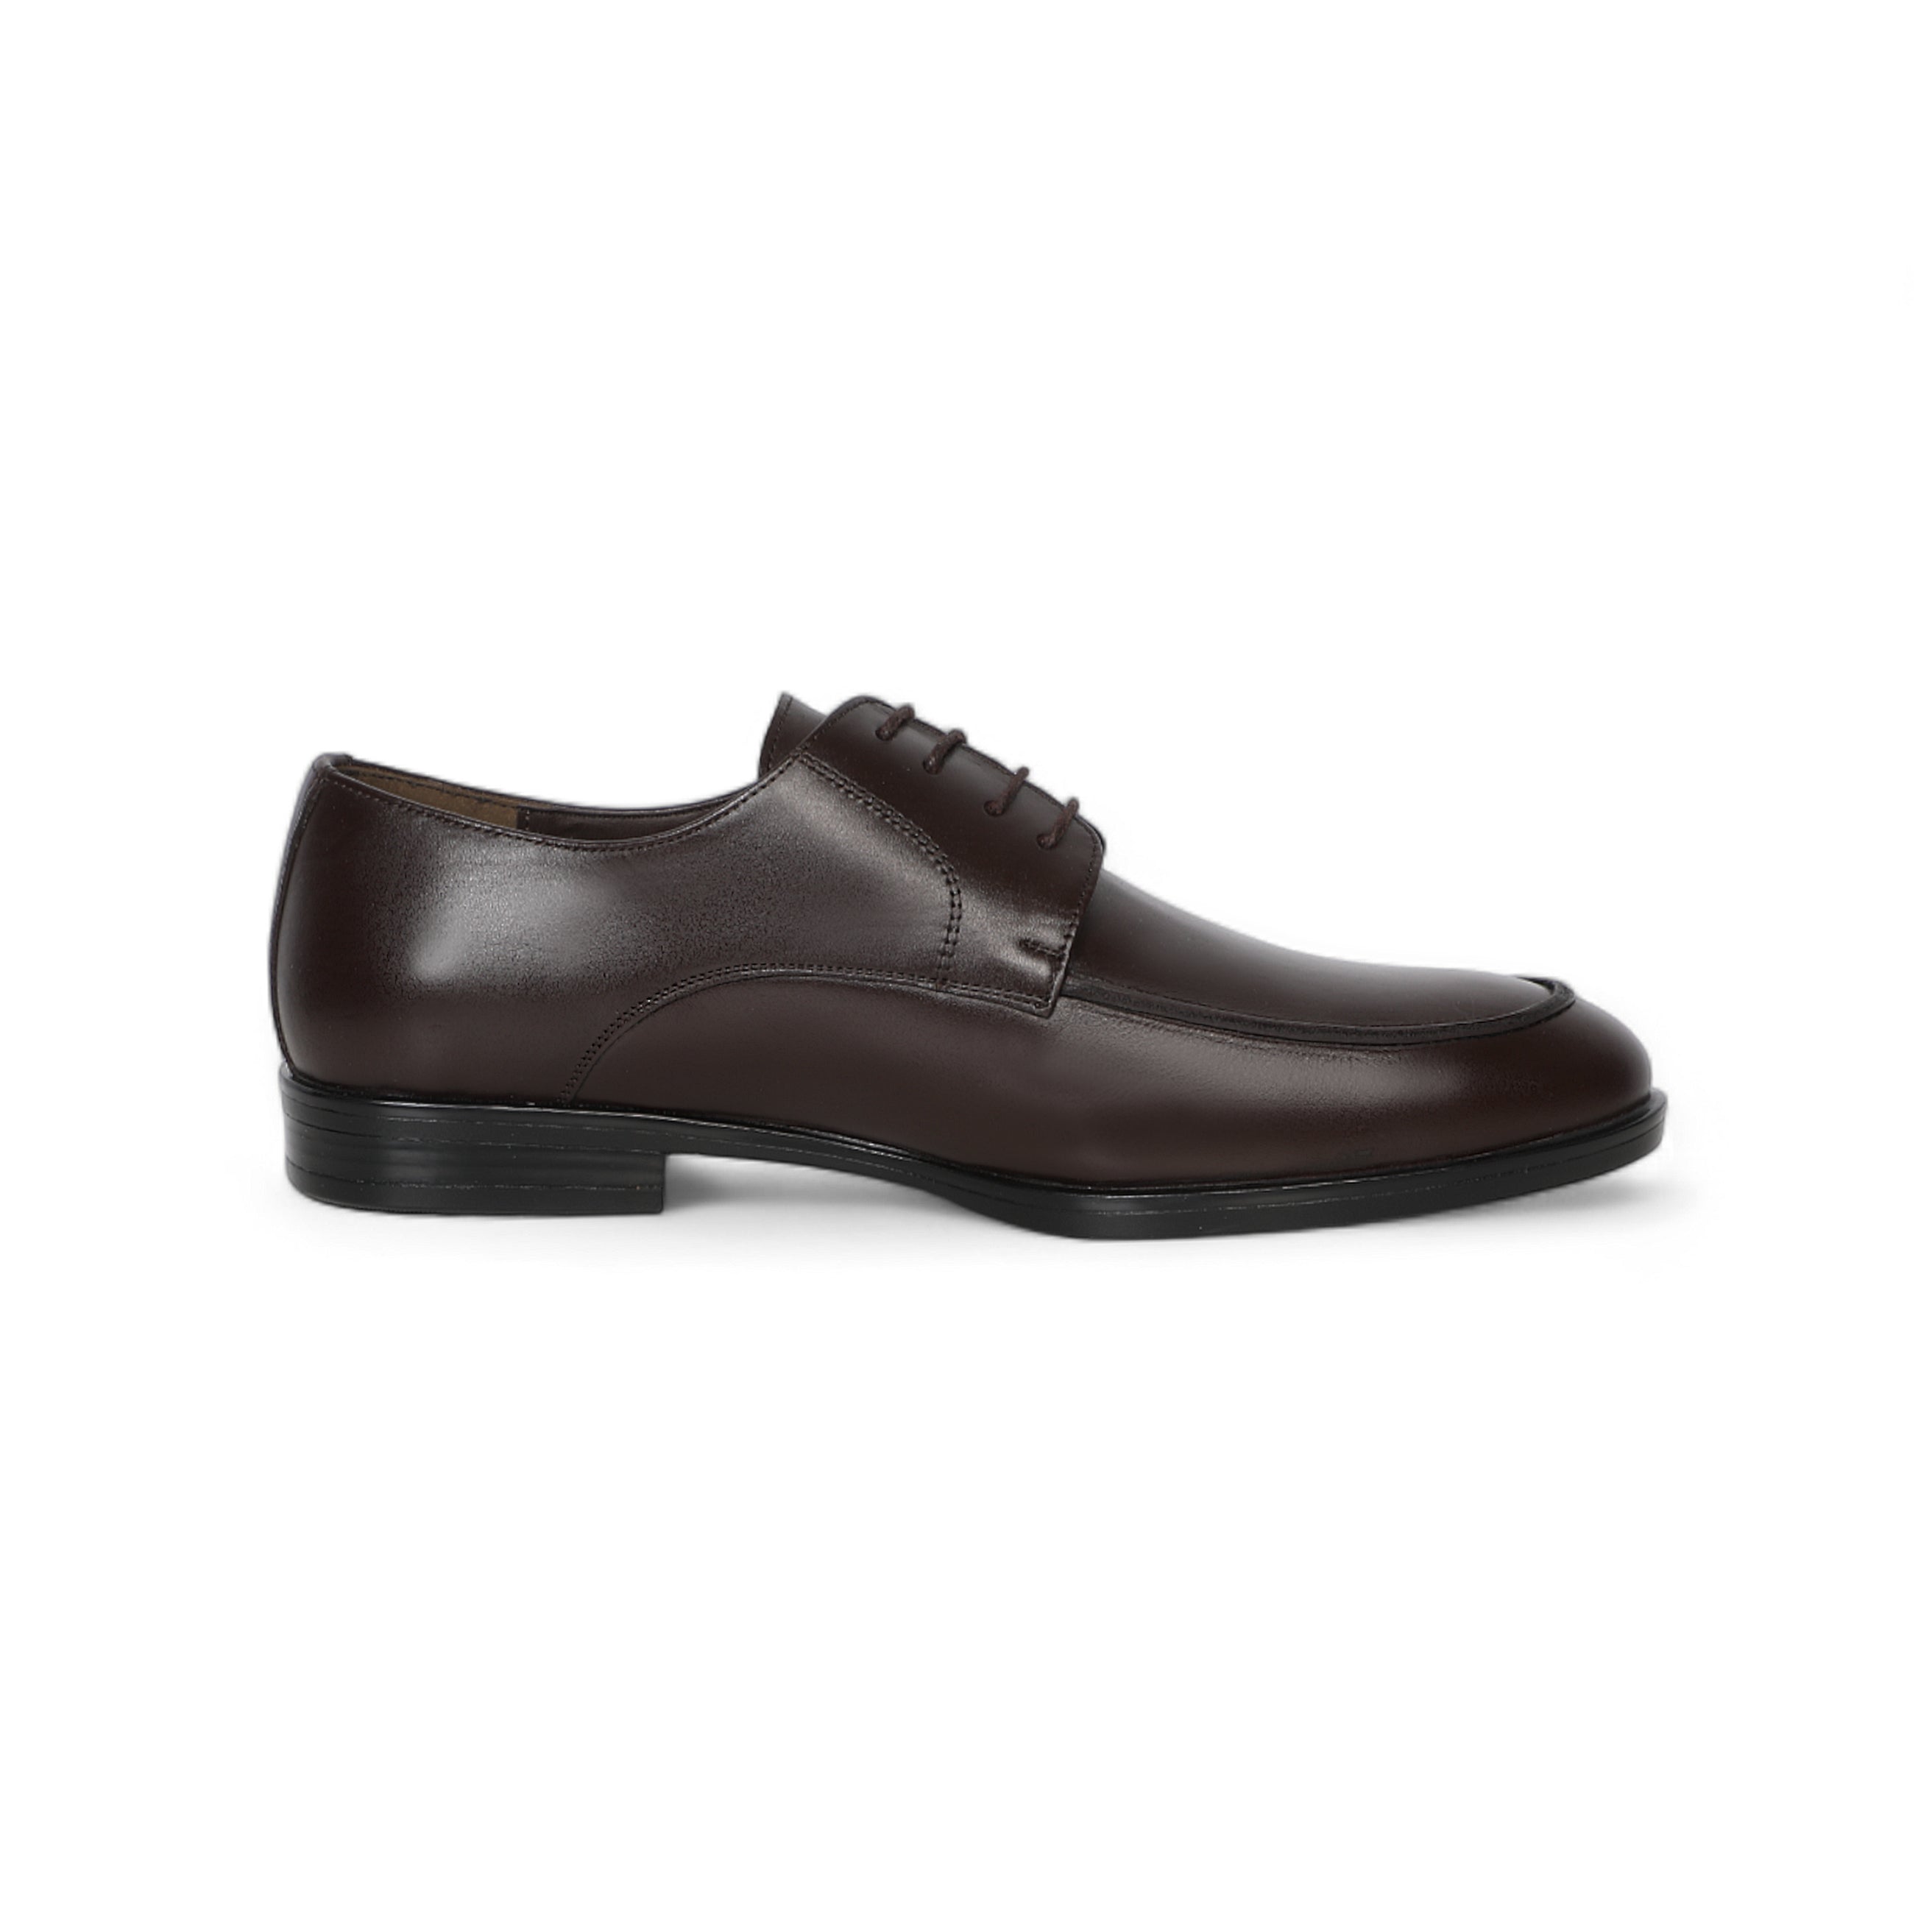 Brown Classic Shoes With Lace-Up Design